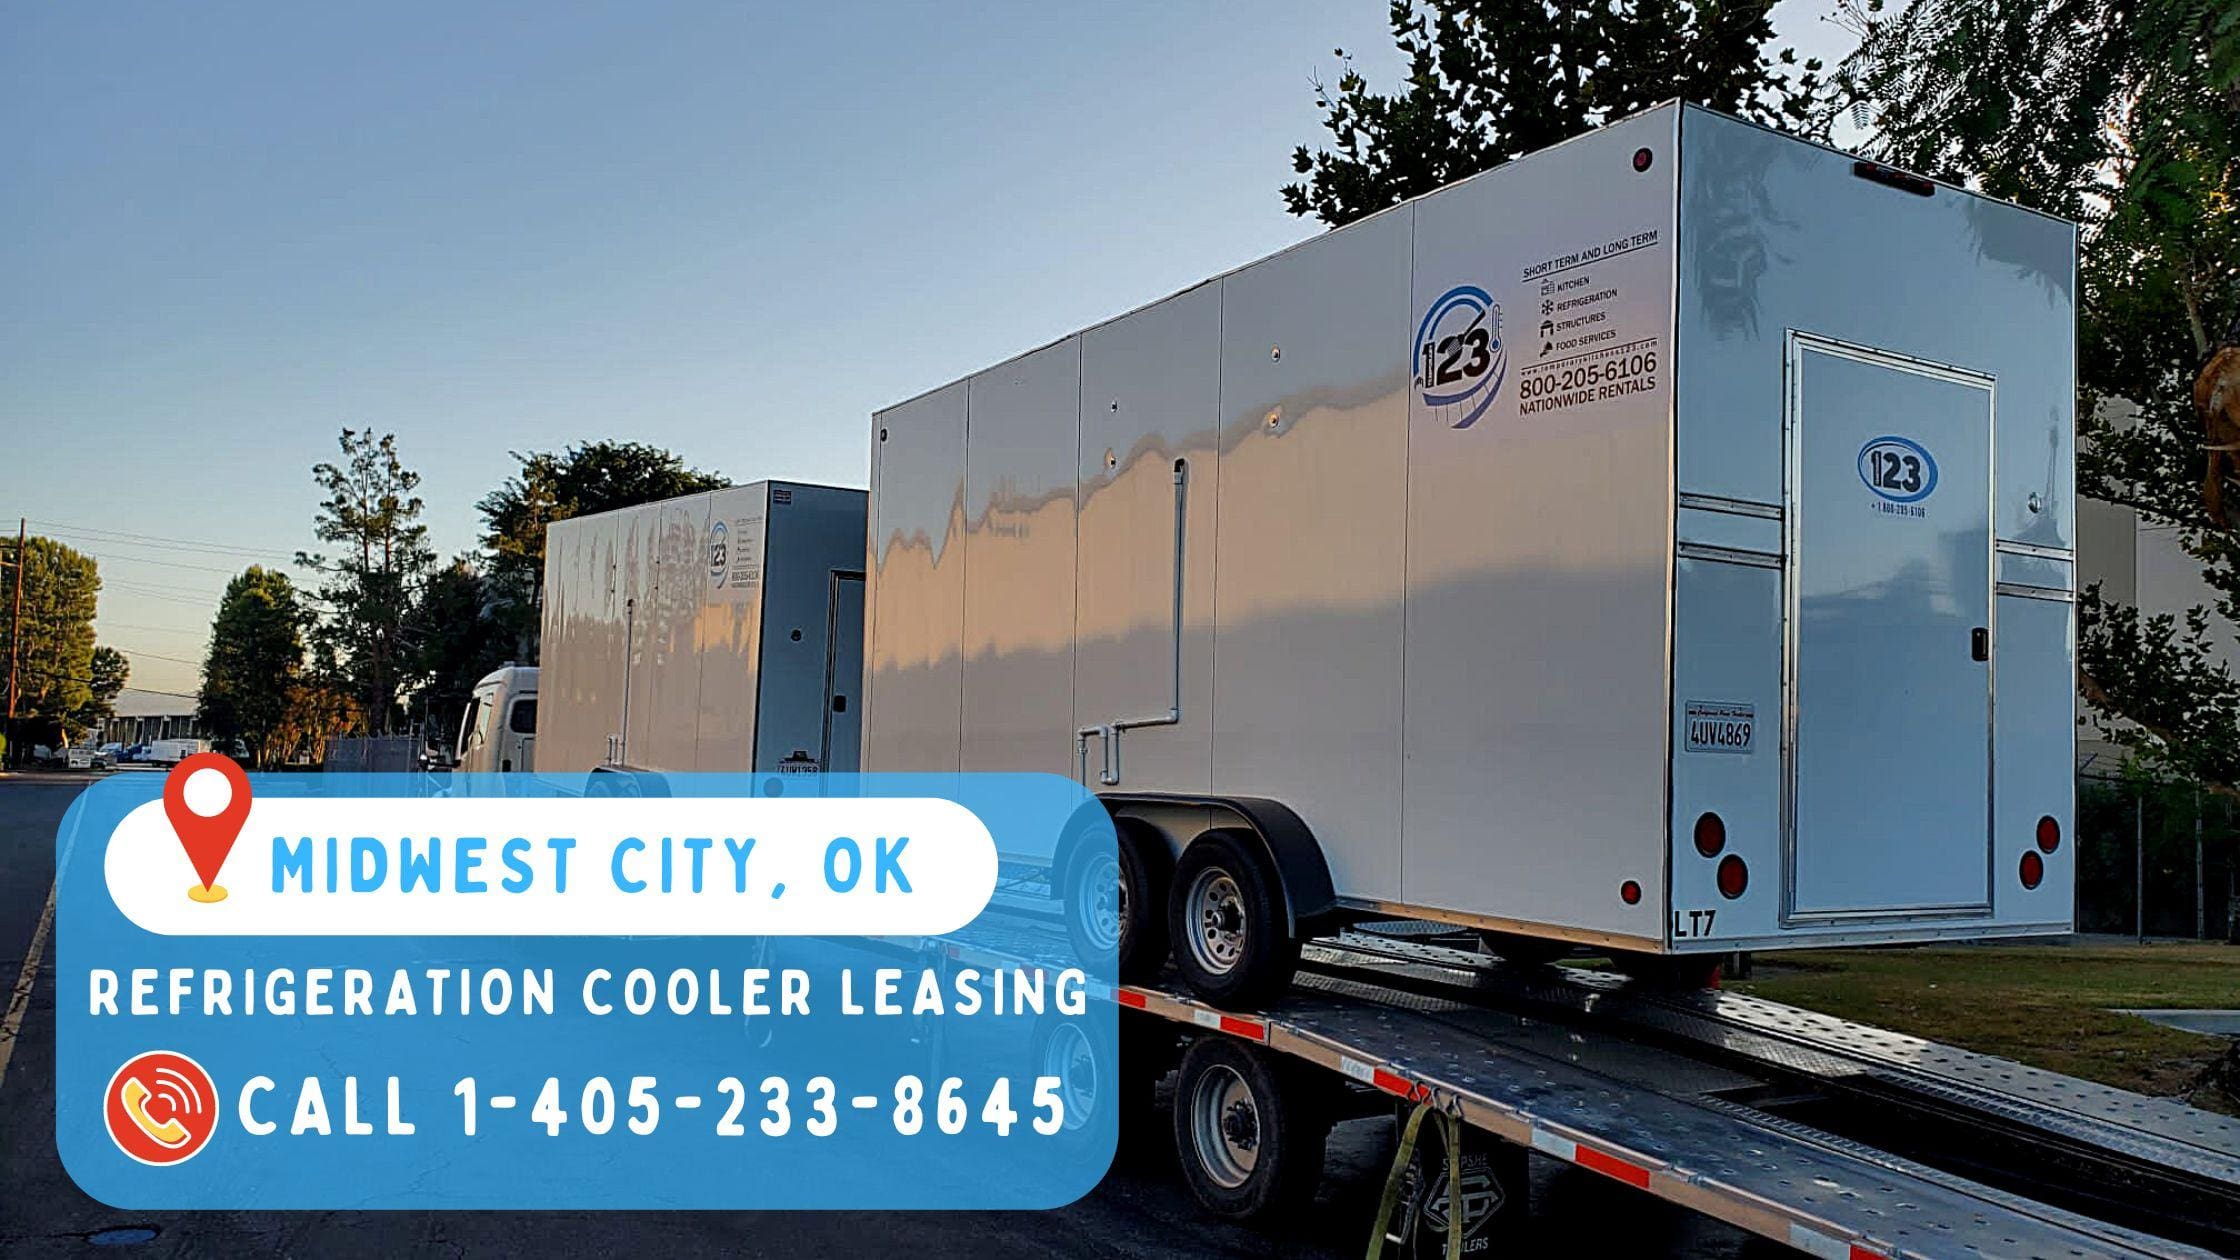 Refrigeration Cooler Leasing in Midwest City, OK